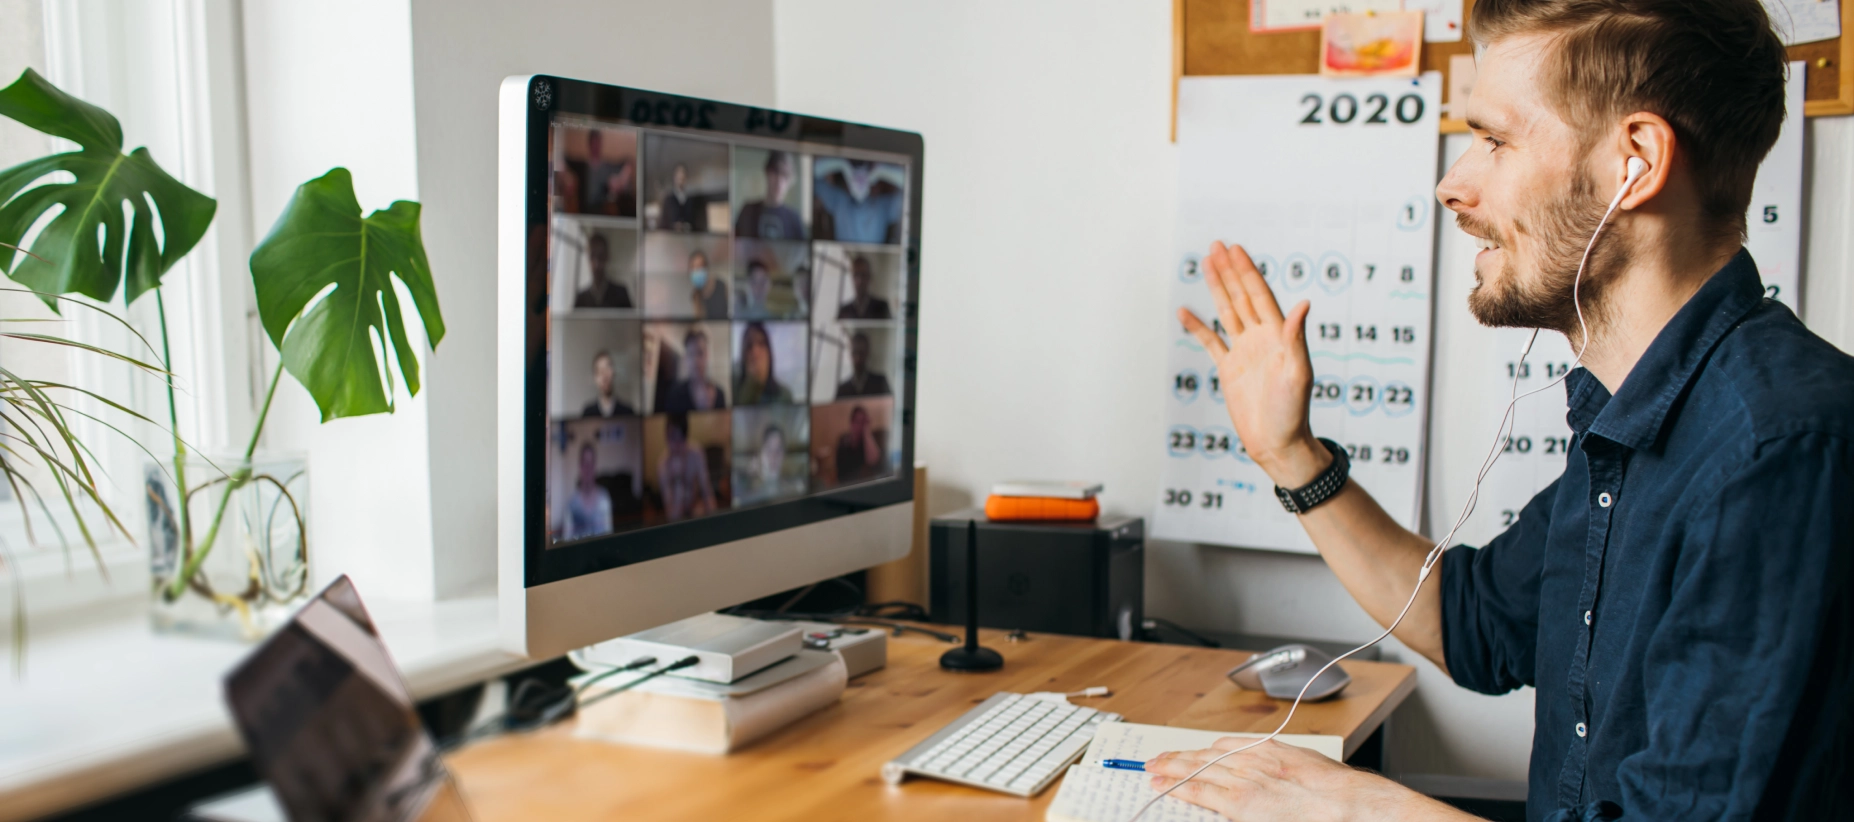 HIPAA-Compliant Video Conferencing Platforms: How to Build Your Own?